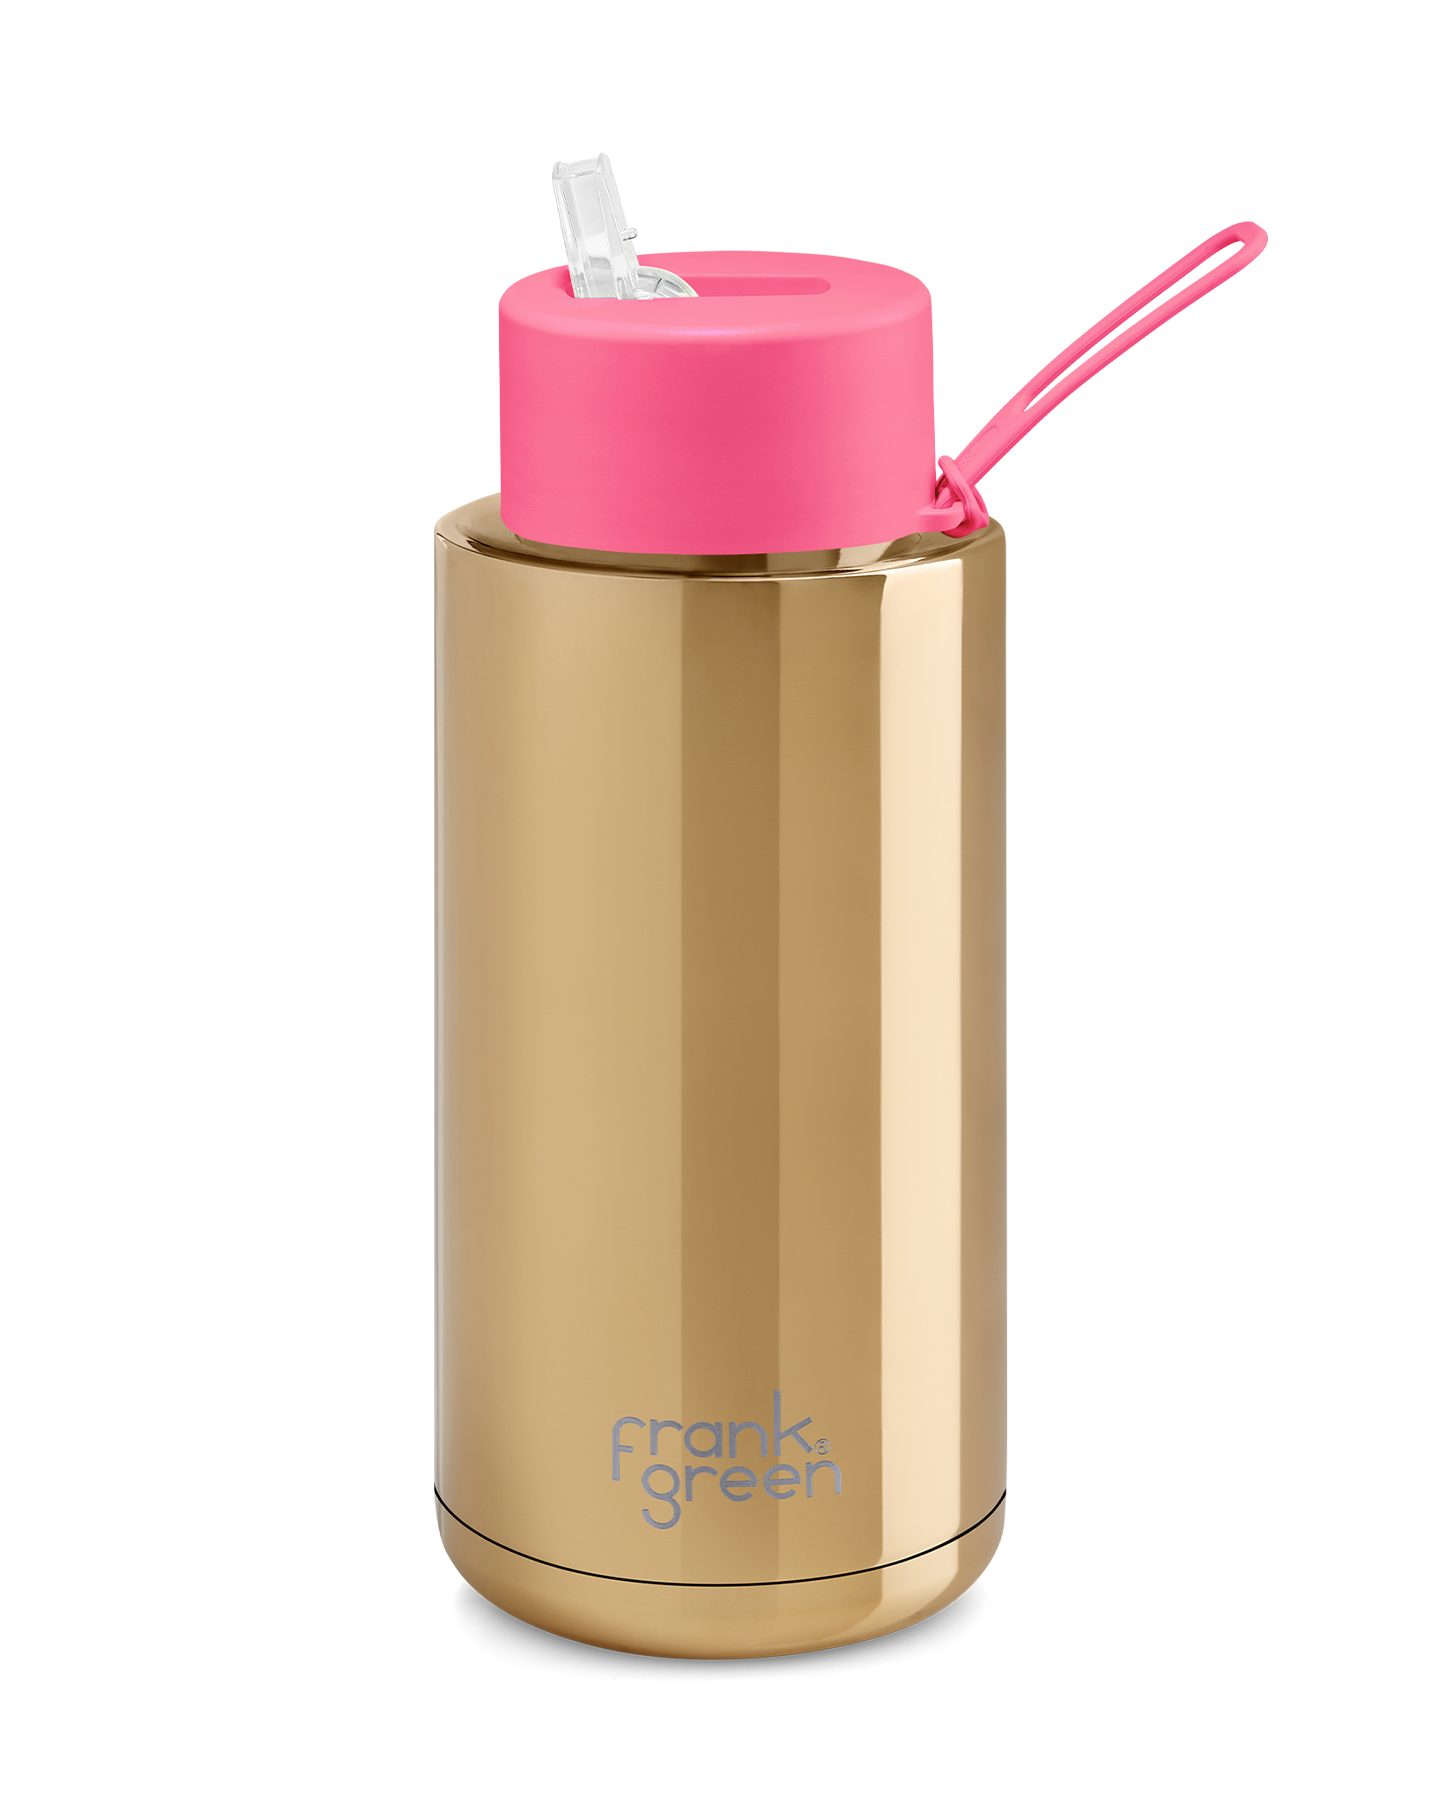 FRANK GREEN CHROME GOLD CERAMIC REUSABLE BOTTLE 34oz/1 LITRE WITH STRAW LID - NEON PINK